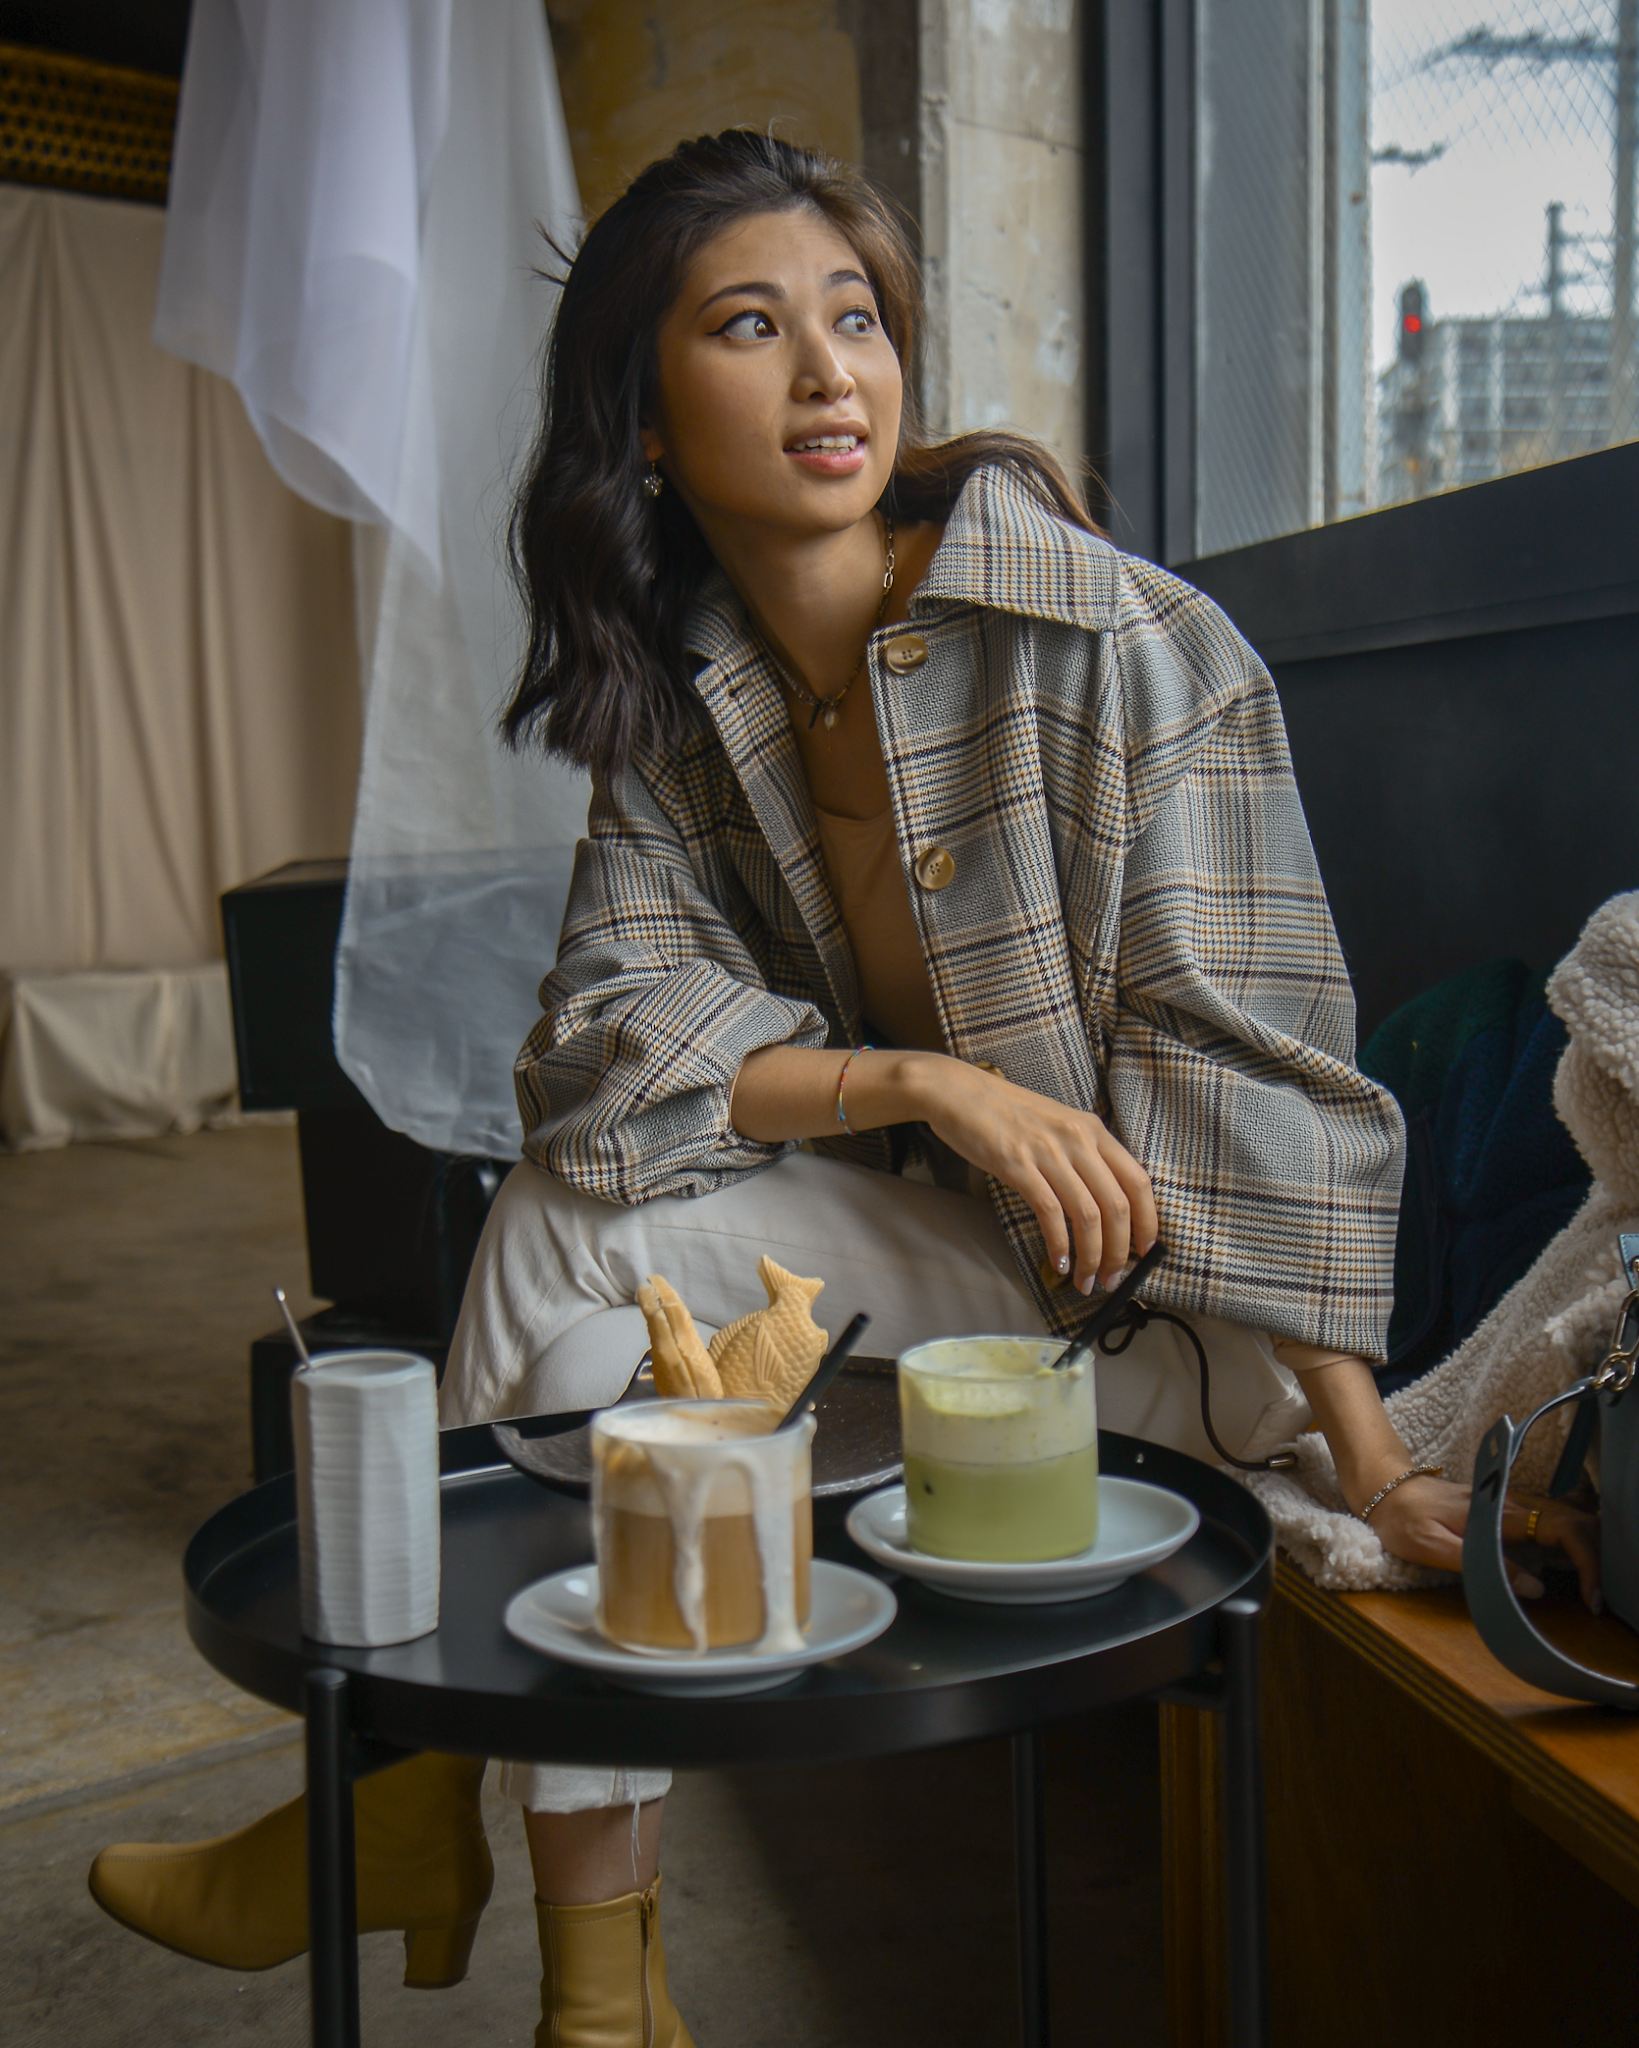 Jacket Layering for winter shearling moto and cropped plaid, winter layering tips, style hack for winter, jacket layering combination, Aimai cafe Fukuoka  - FOREVERVANNY